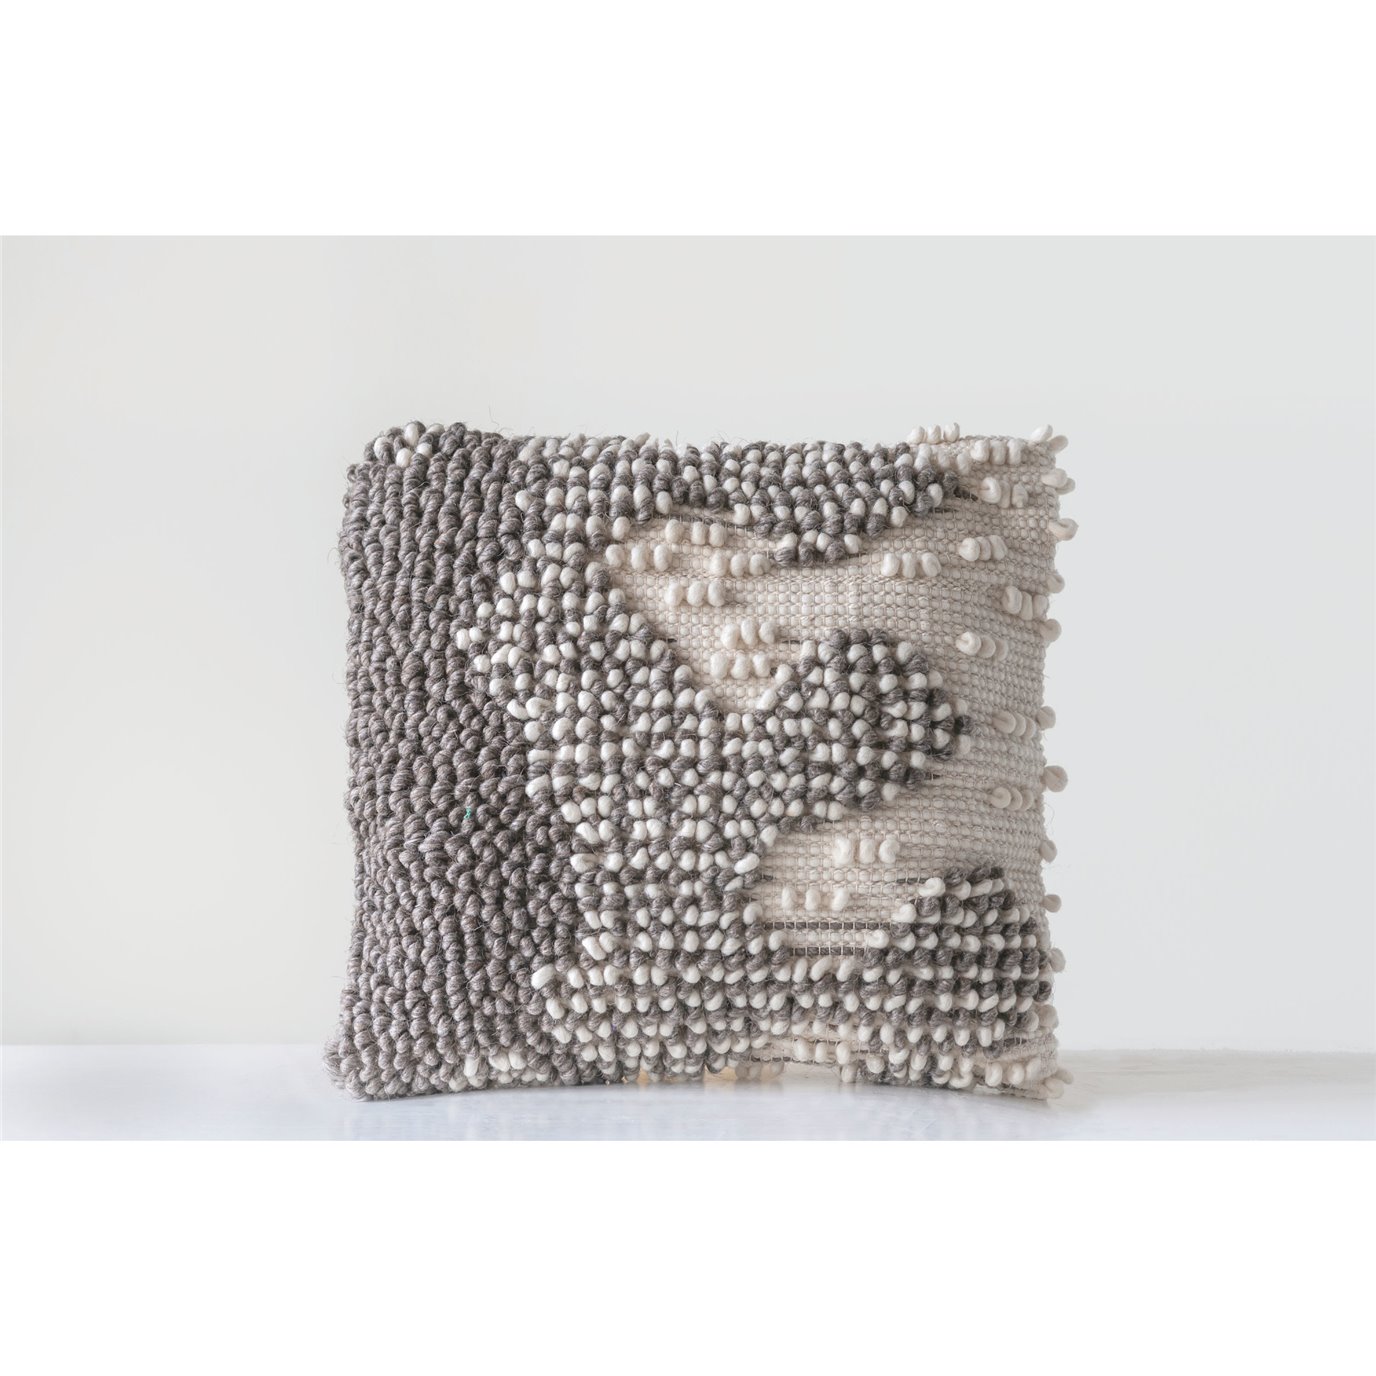 Hand Woven Grey & White Square Woven Wool Pillow